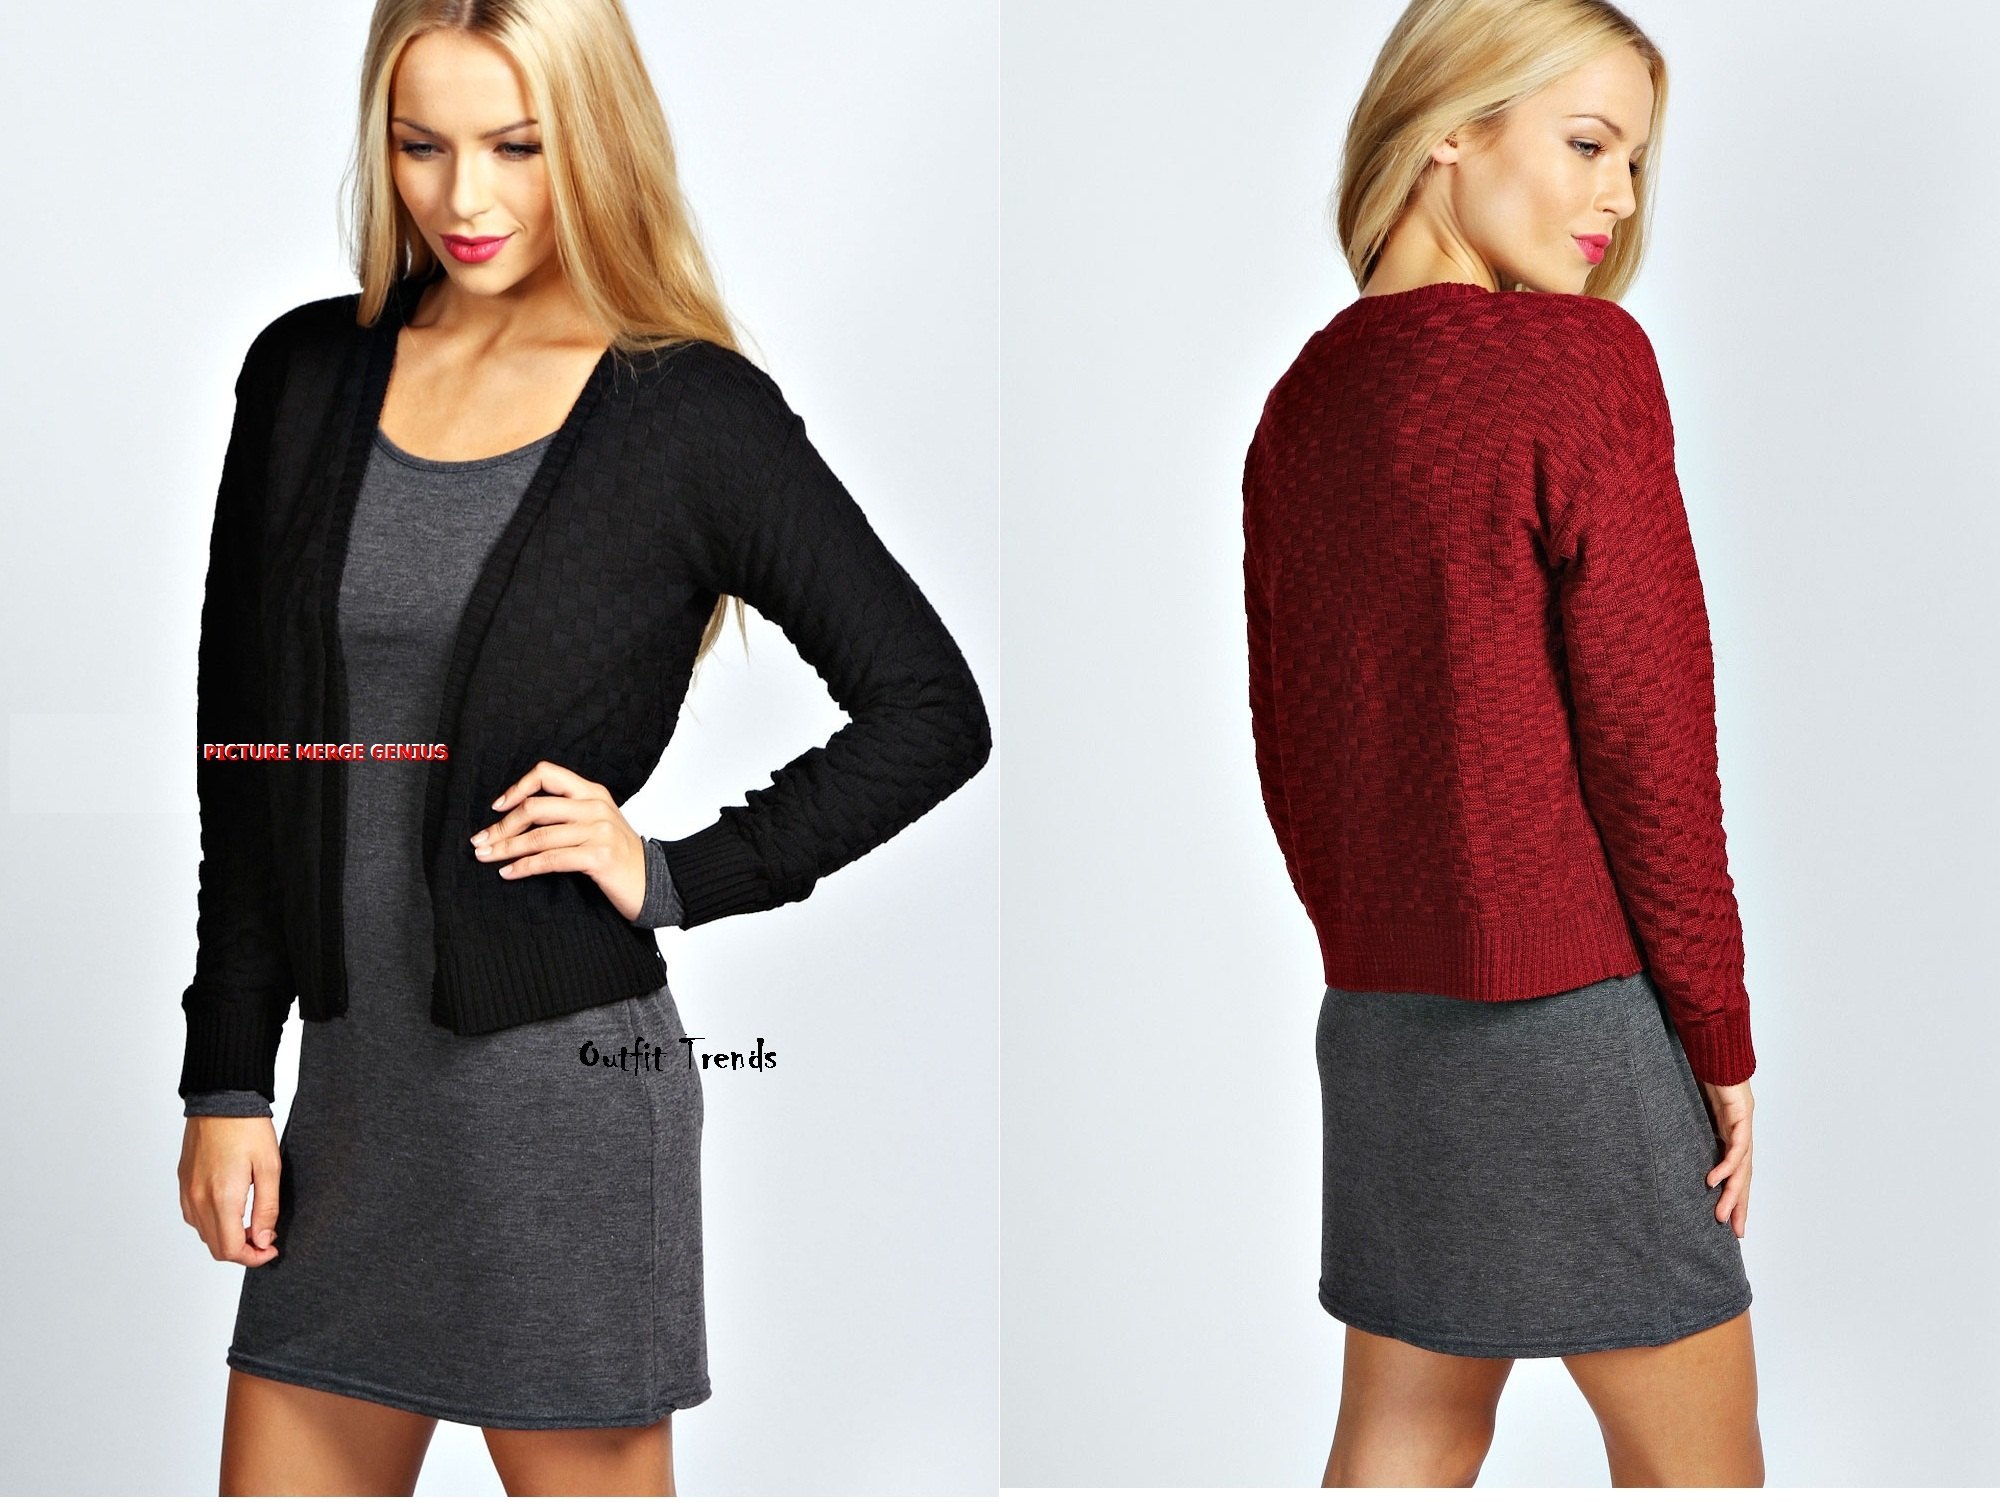 Stylish Black and Red Cardigans